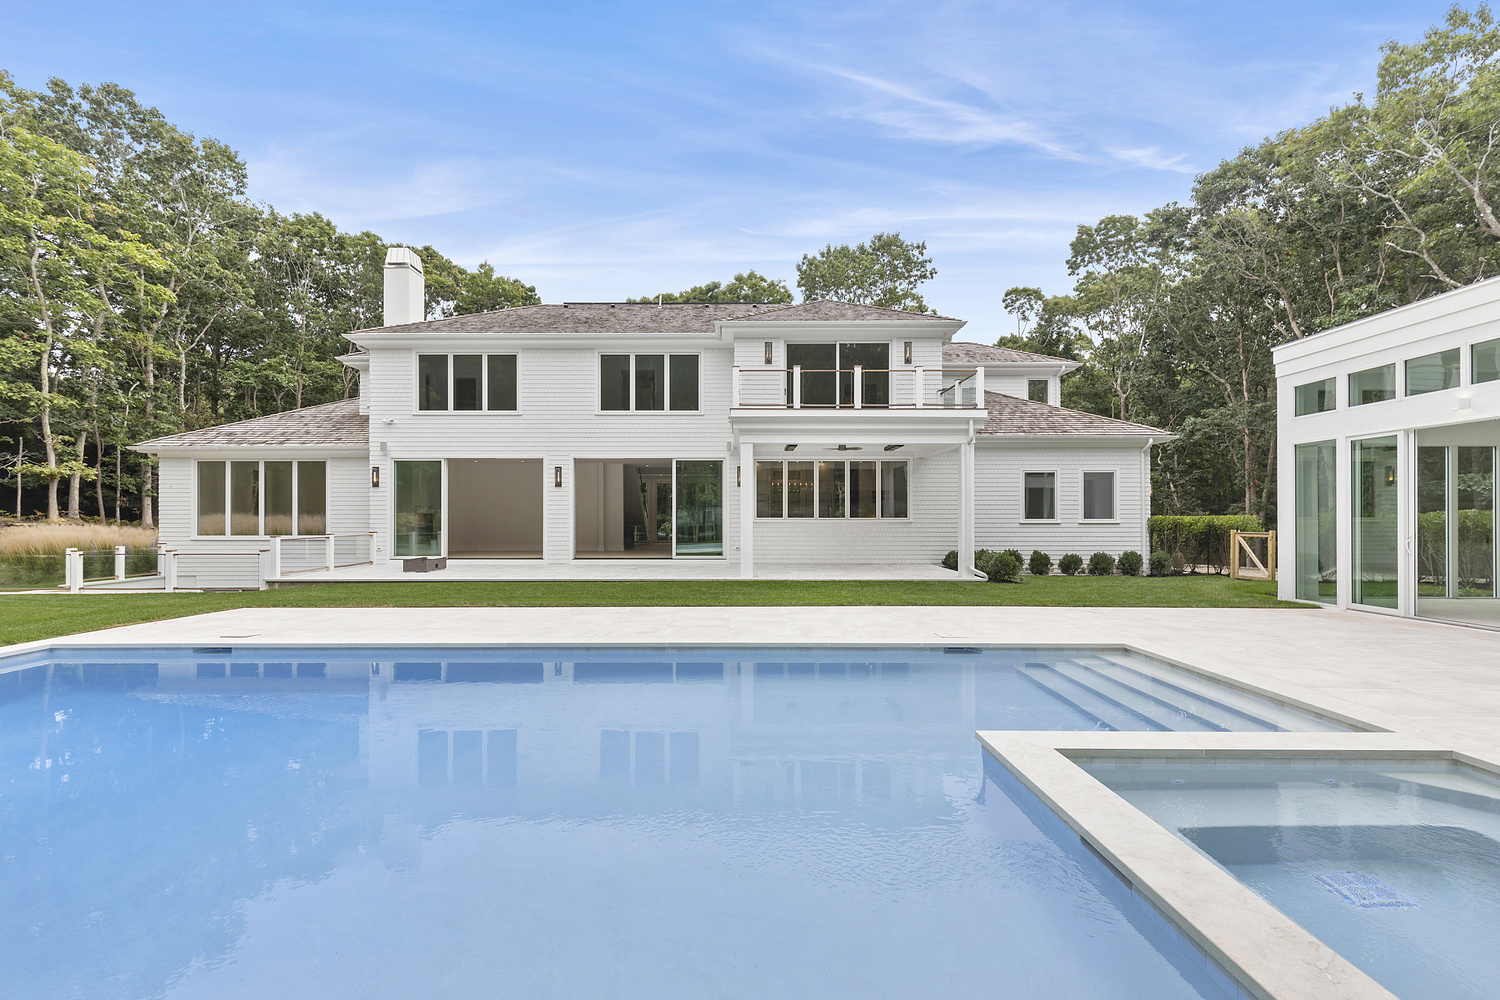 1552 Deerfield Road, Water Mill.  RISE MEDIA FOR SOTHEBY'S INTERNATIONAL REALTY